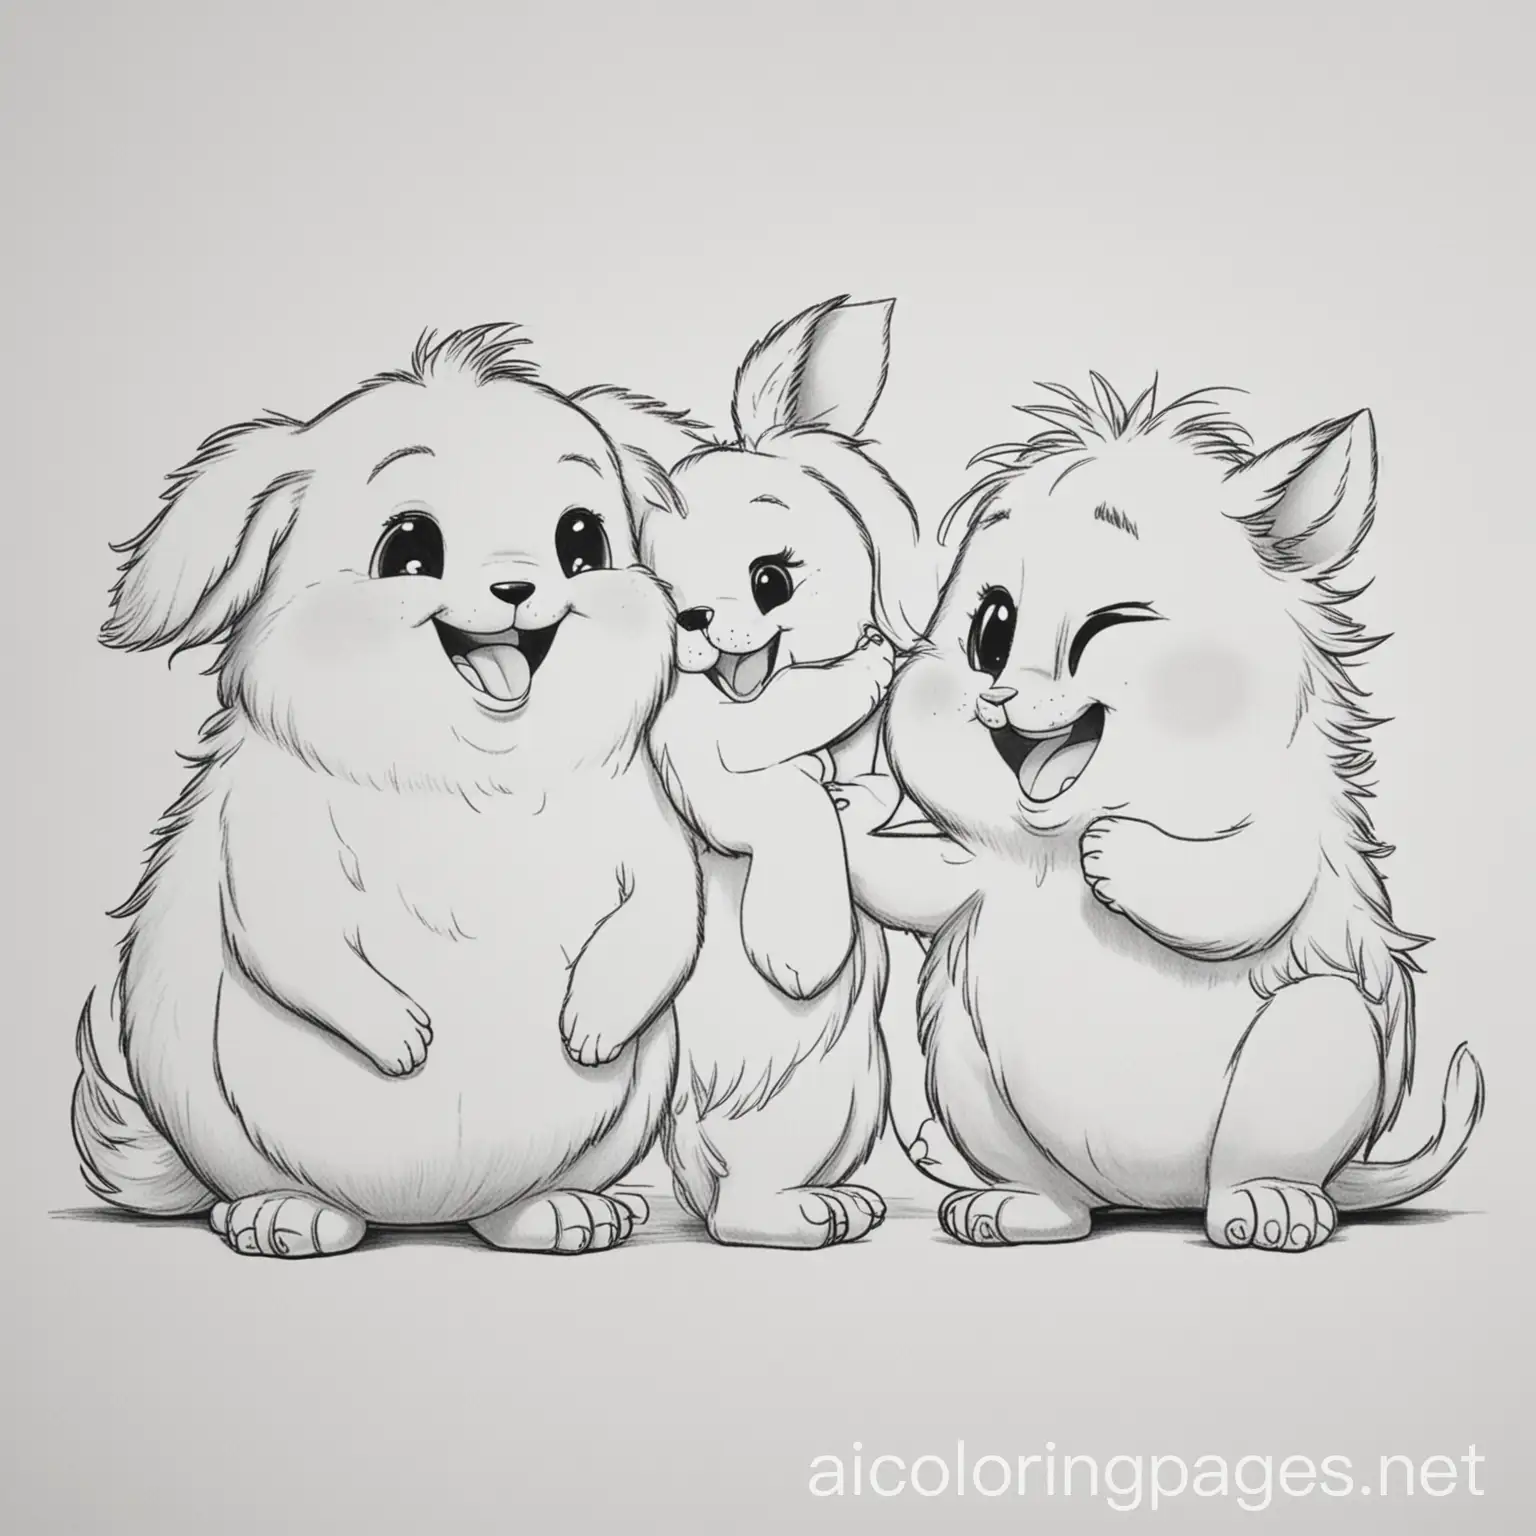 2 Tiere die Freunde sind und lachen, Coloring Page, black and white, line art, white background, Simplicity, Ample White Space. The background of the coloring page is plain white to make it easy for young children to color within the lines. The outlines of all the subjects are easy to distinguish, making it simple for kids to color without too much difficulty